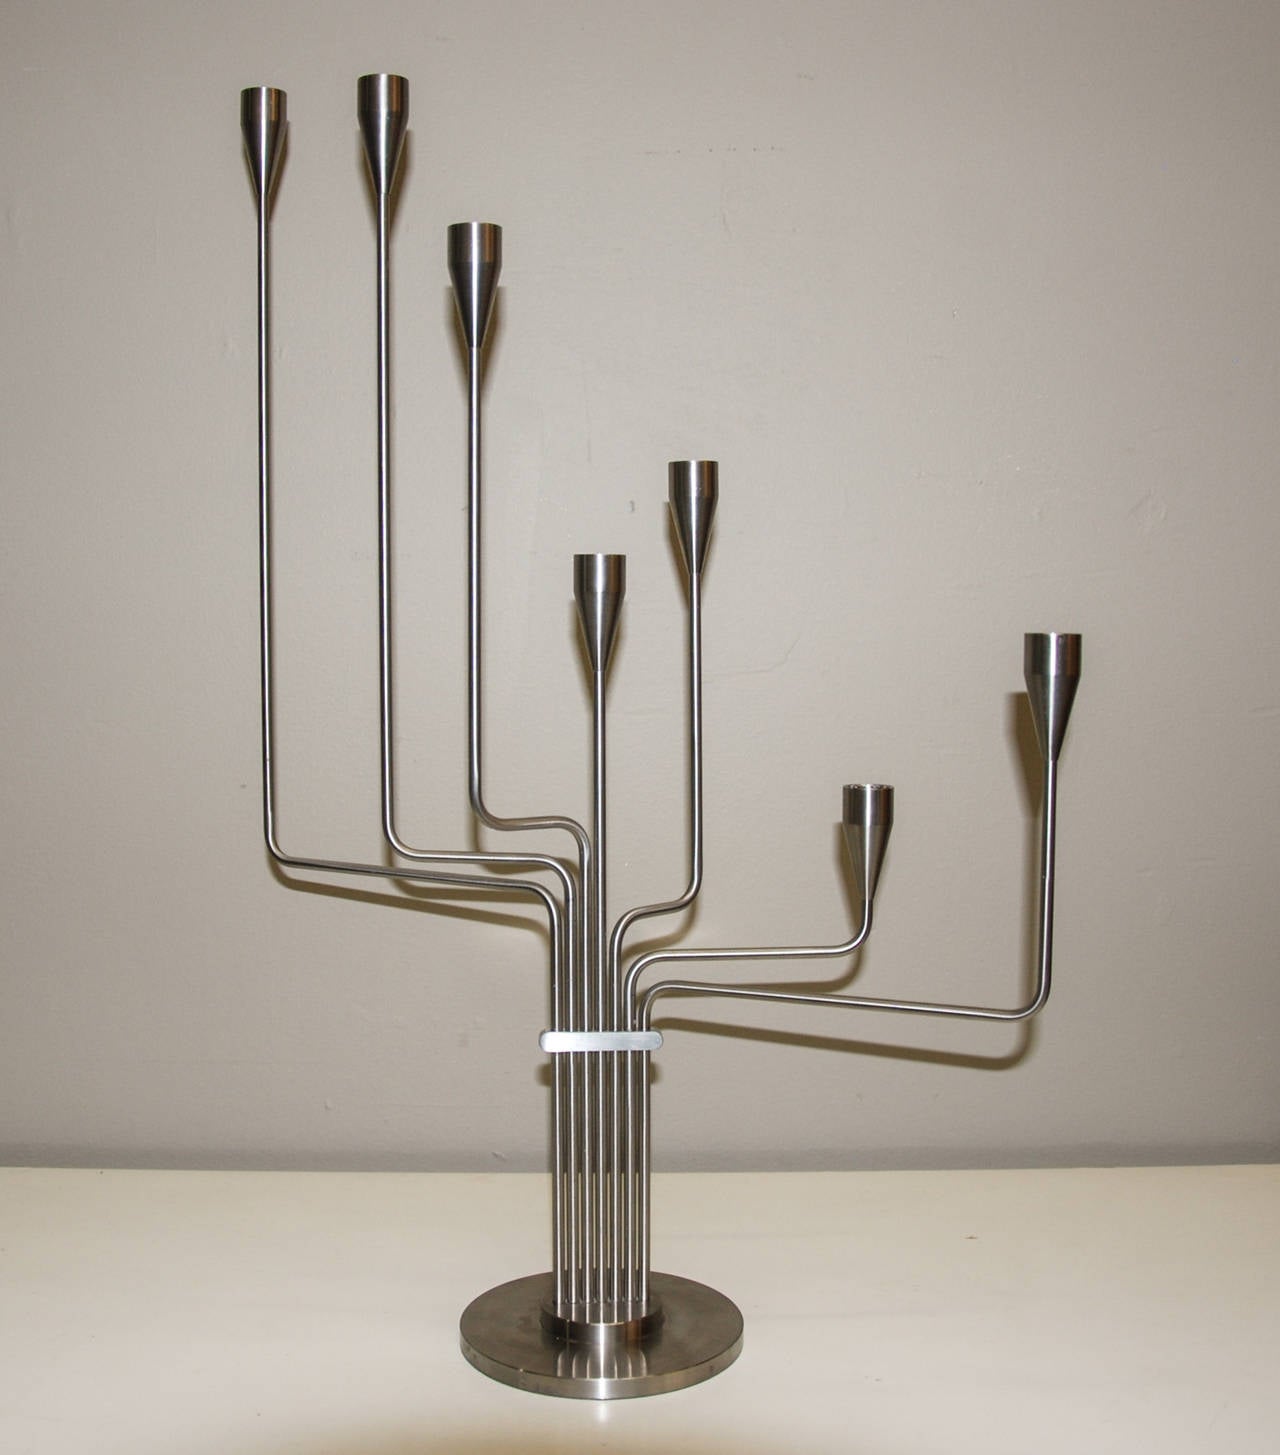 A Piet Hein articulated brushed stainless steel candelabra designed to replicate the Big Dipper of the Ursa Major constellation.  The piece is marked Piet Hein on the collar and includes seven formed bobeches.